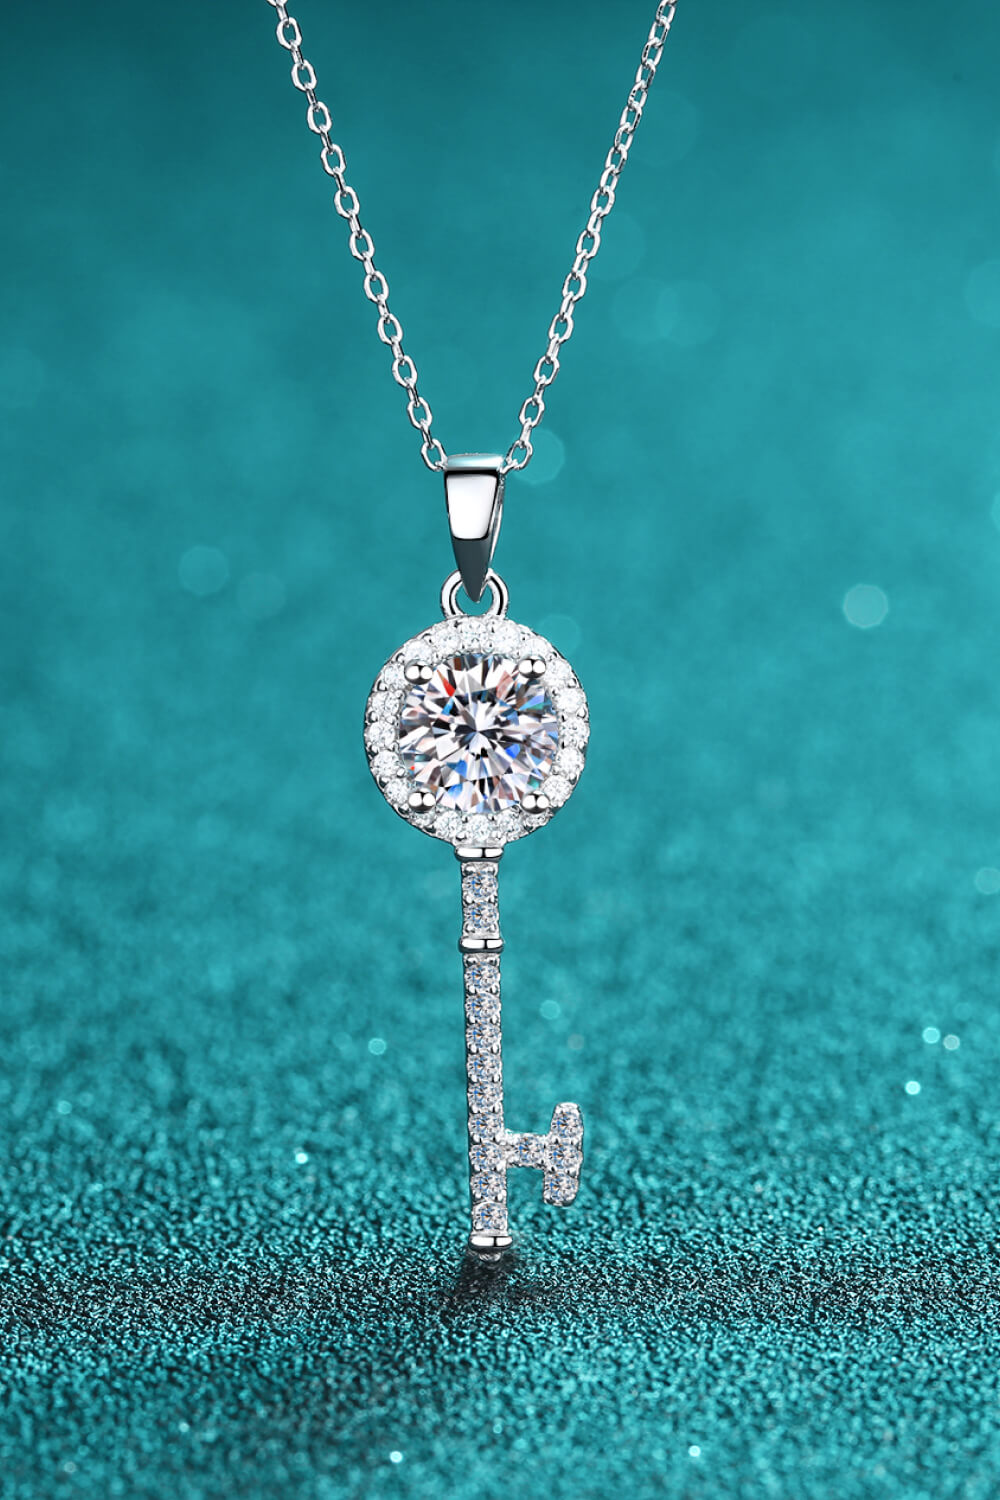 Adored Moissanite Key Pendant Necklace - Tophatter Shopping Deals